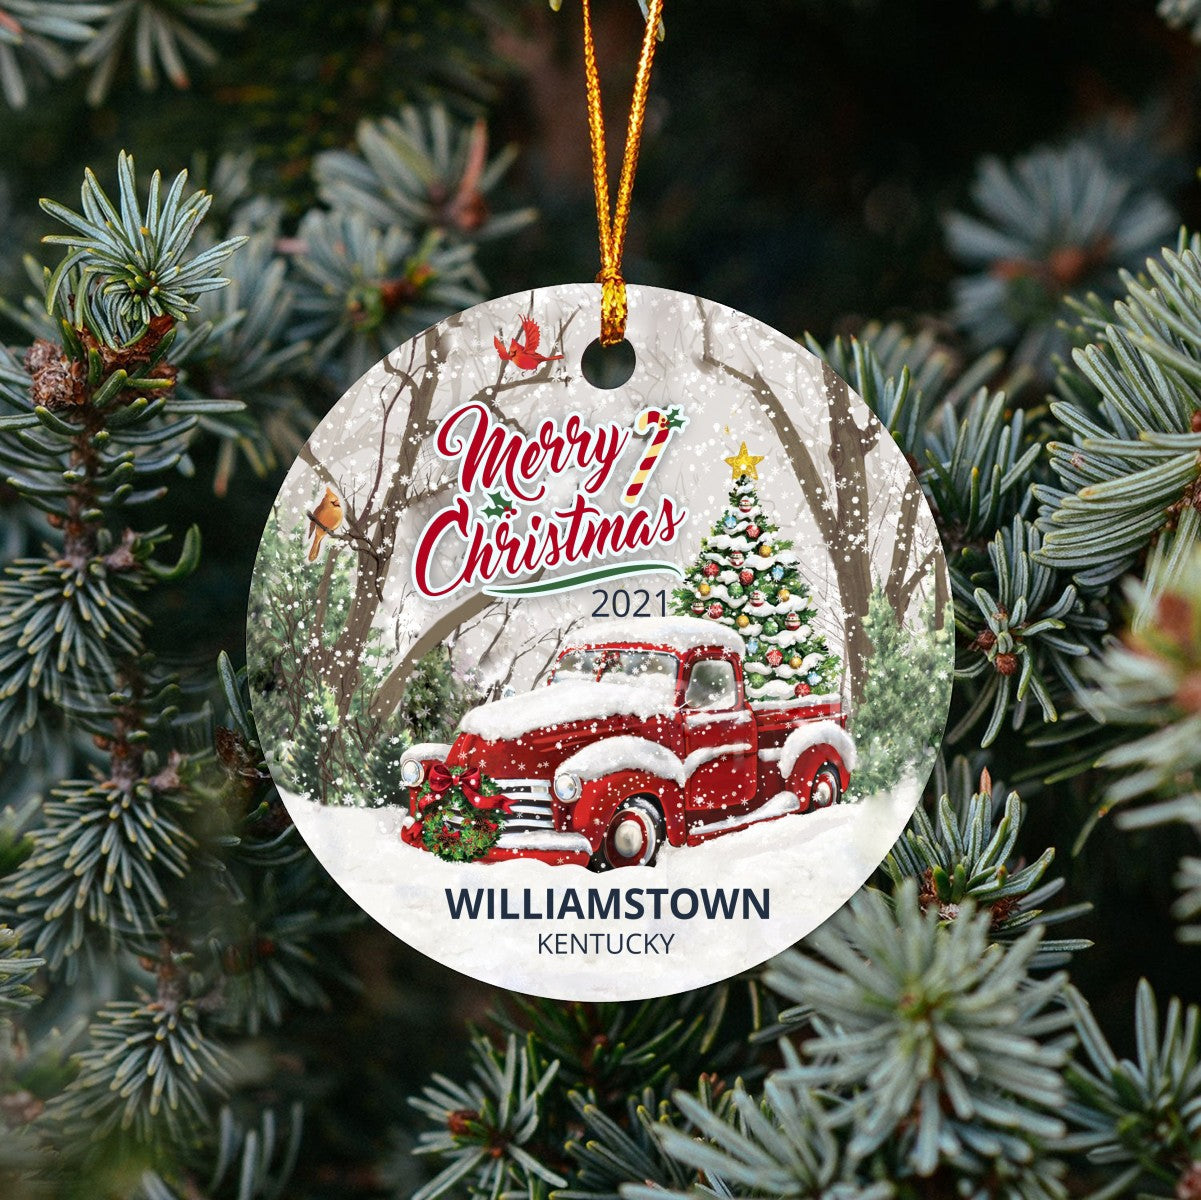 Christmas Tree Ornaments Williamstown - Ornament With Name City, State Williamstown Kentucky KY Ornament - Red Truck Xmas Ornaments 3'' Plastic Gift For Family, Friend And Housewarming